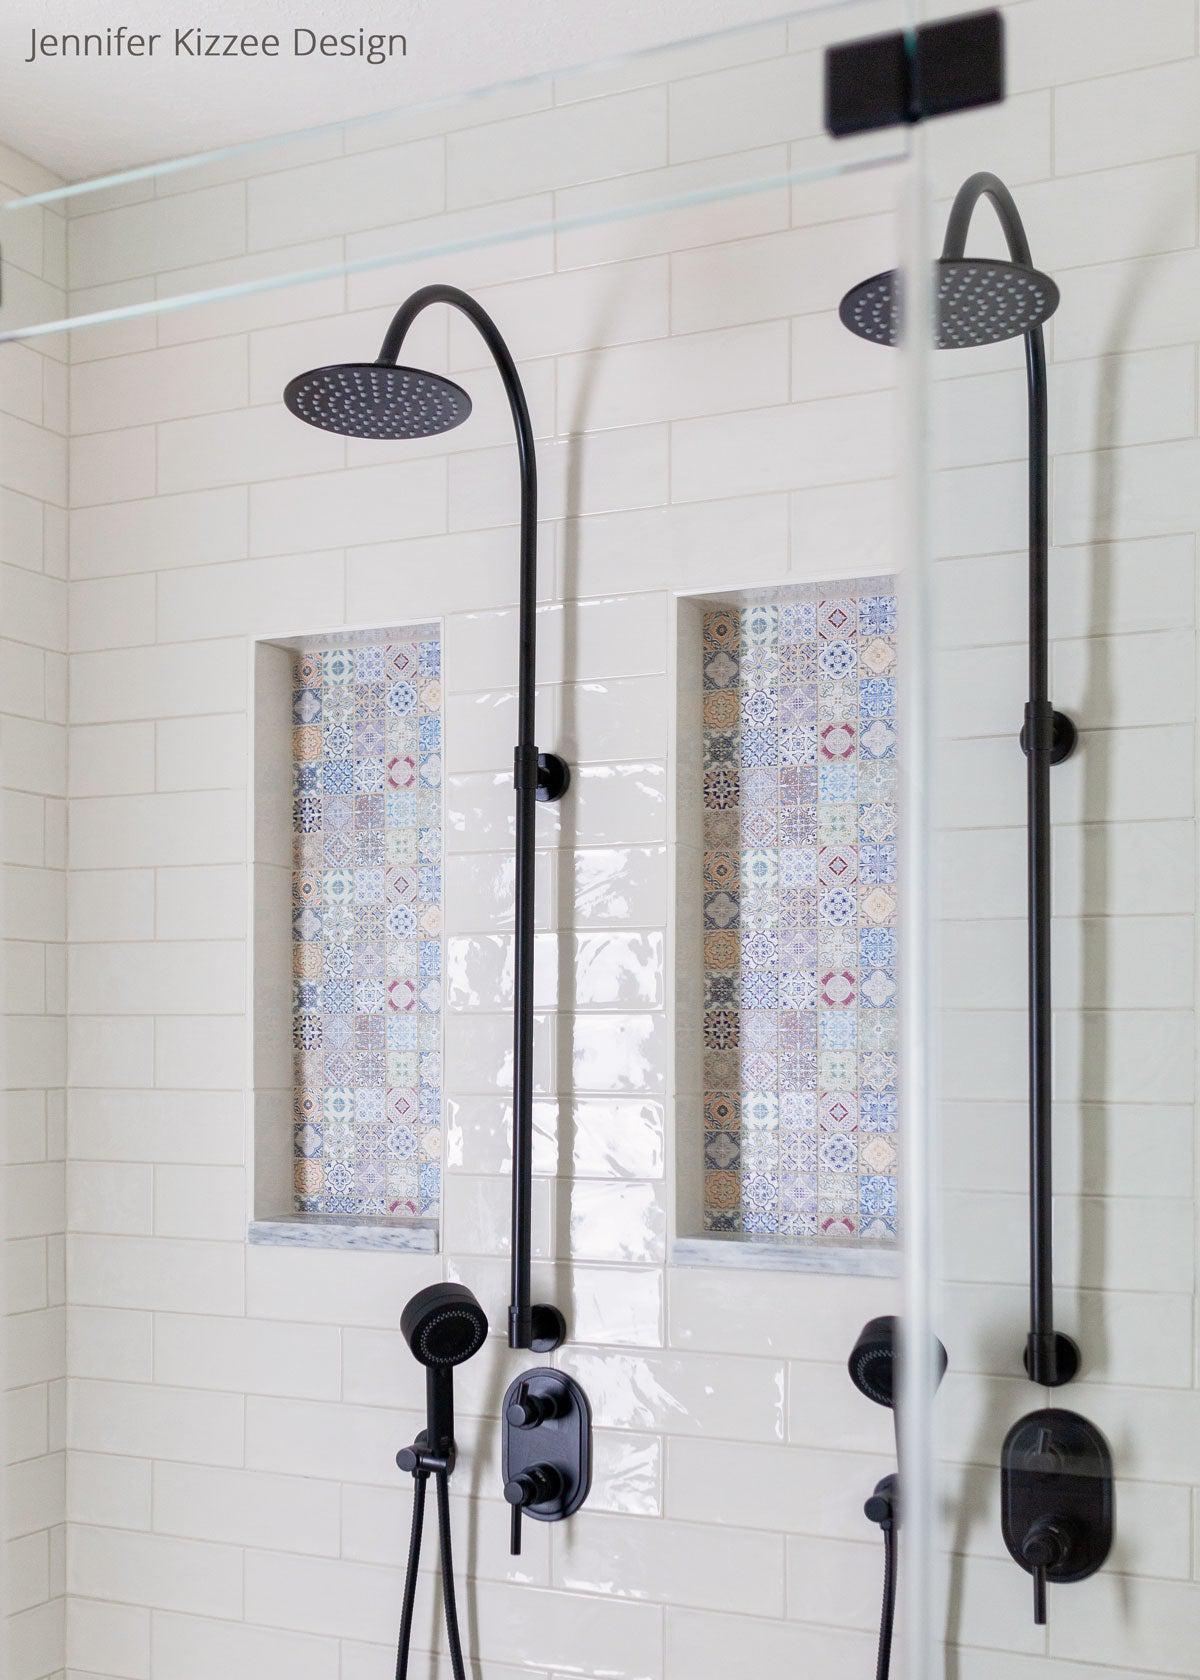 White subway tile shower with colorful niche tile in a Moroccan bathroom